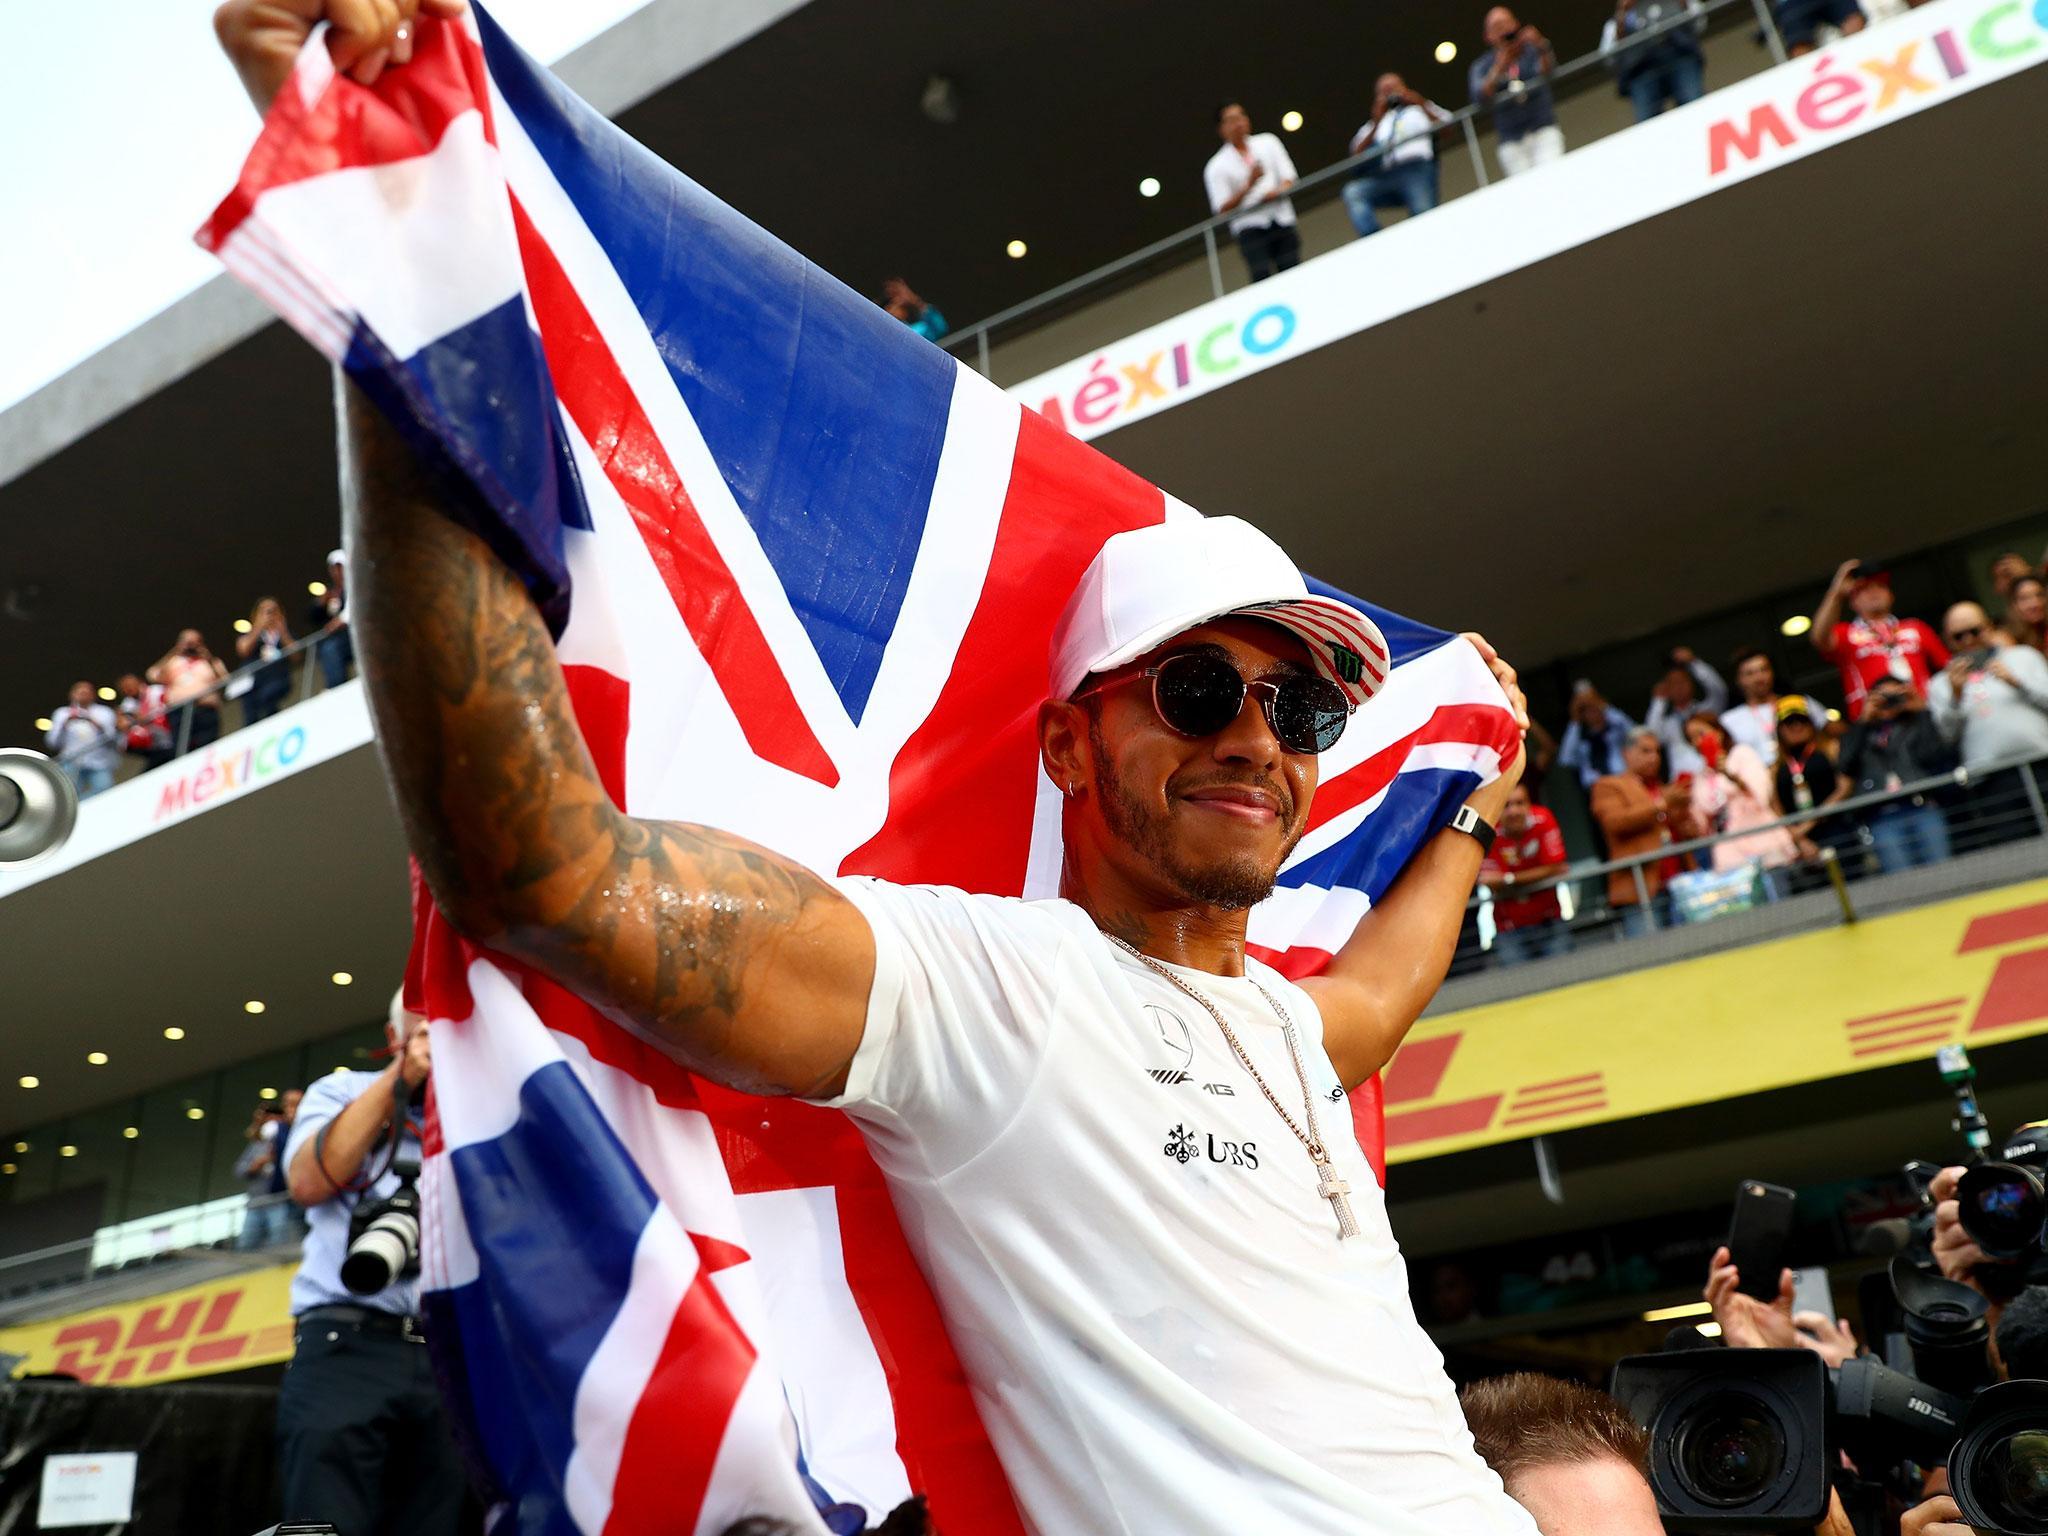 Hamilton is in Brazil after winning the world title a fortnight ago